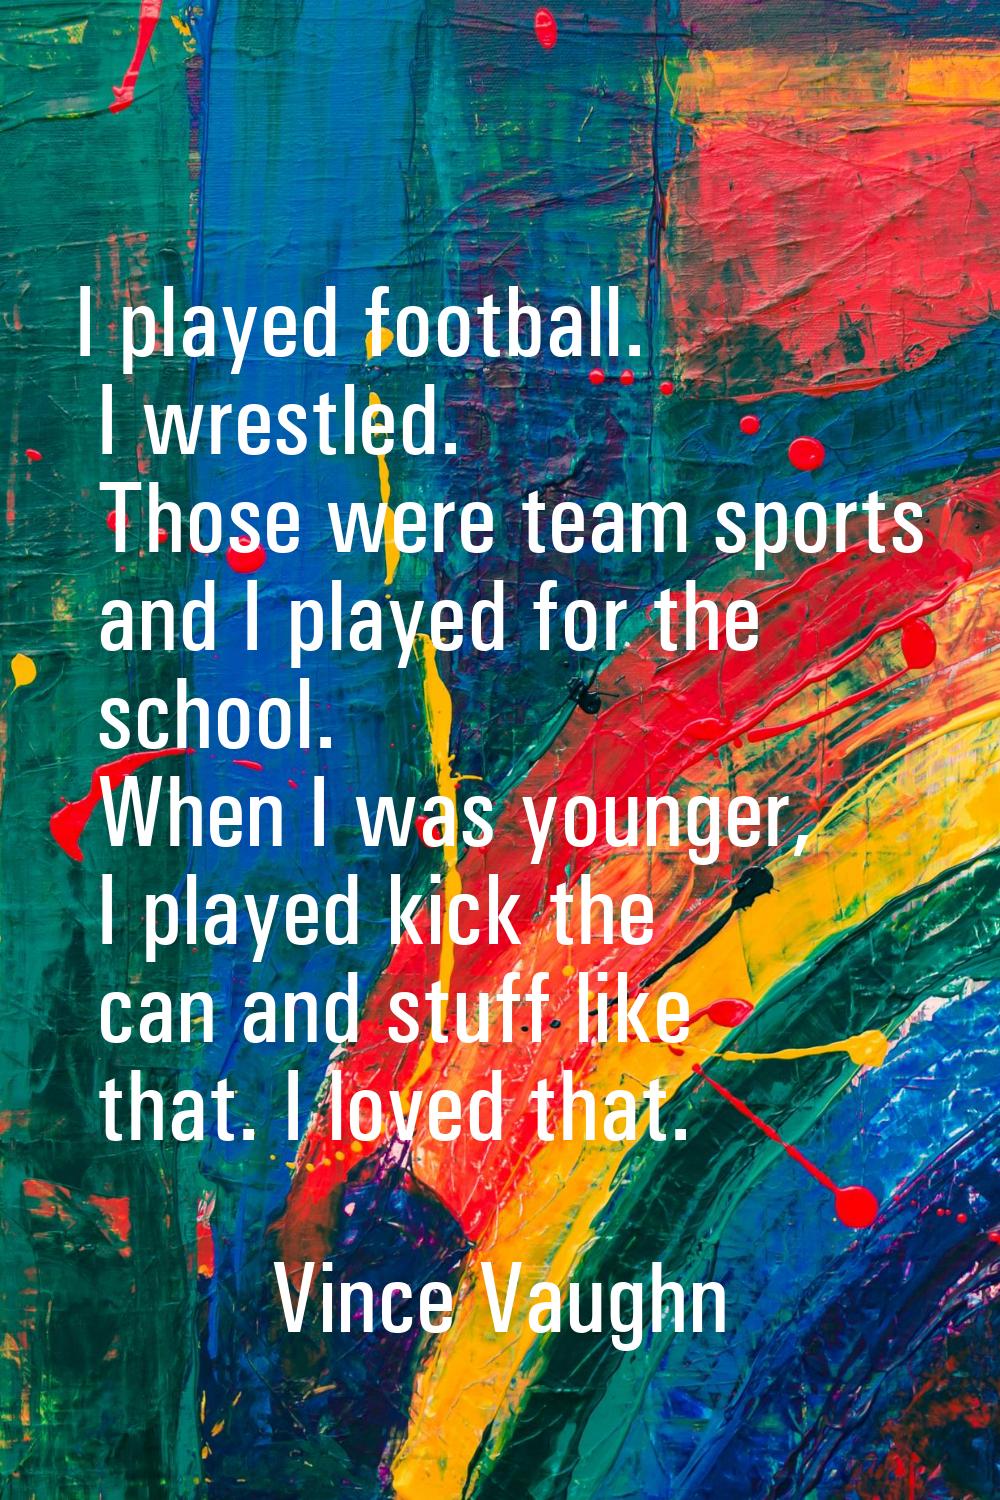 I played football. I wrestled. Those were team sports and I played for the school. When I was young